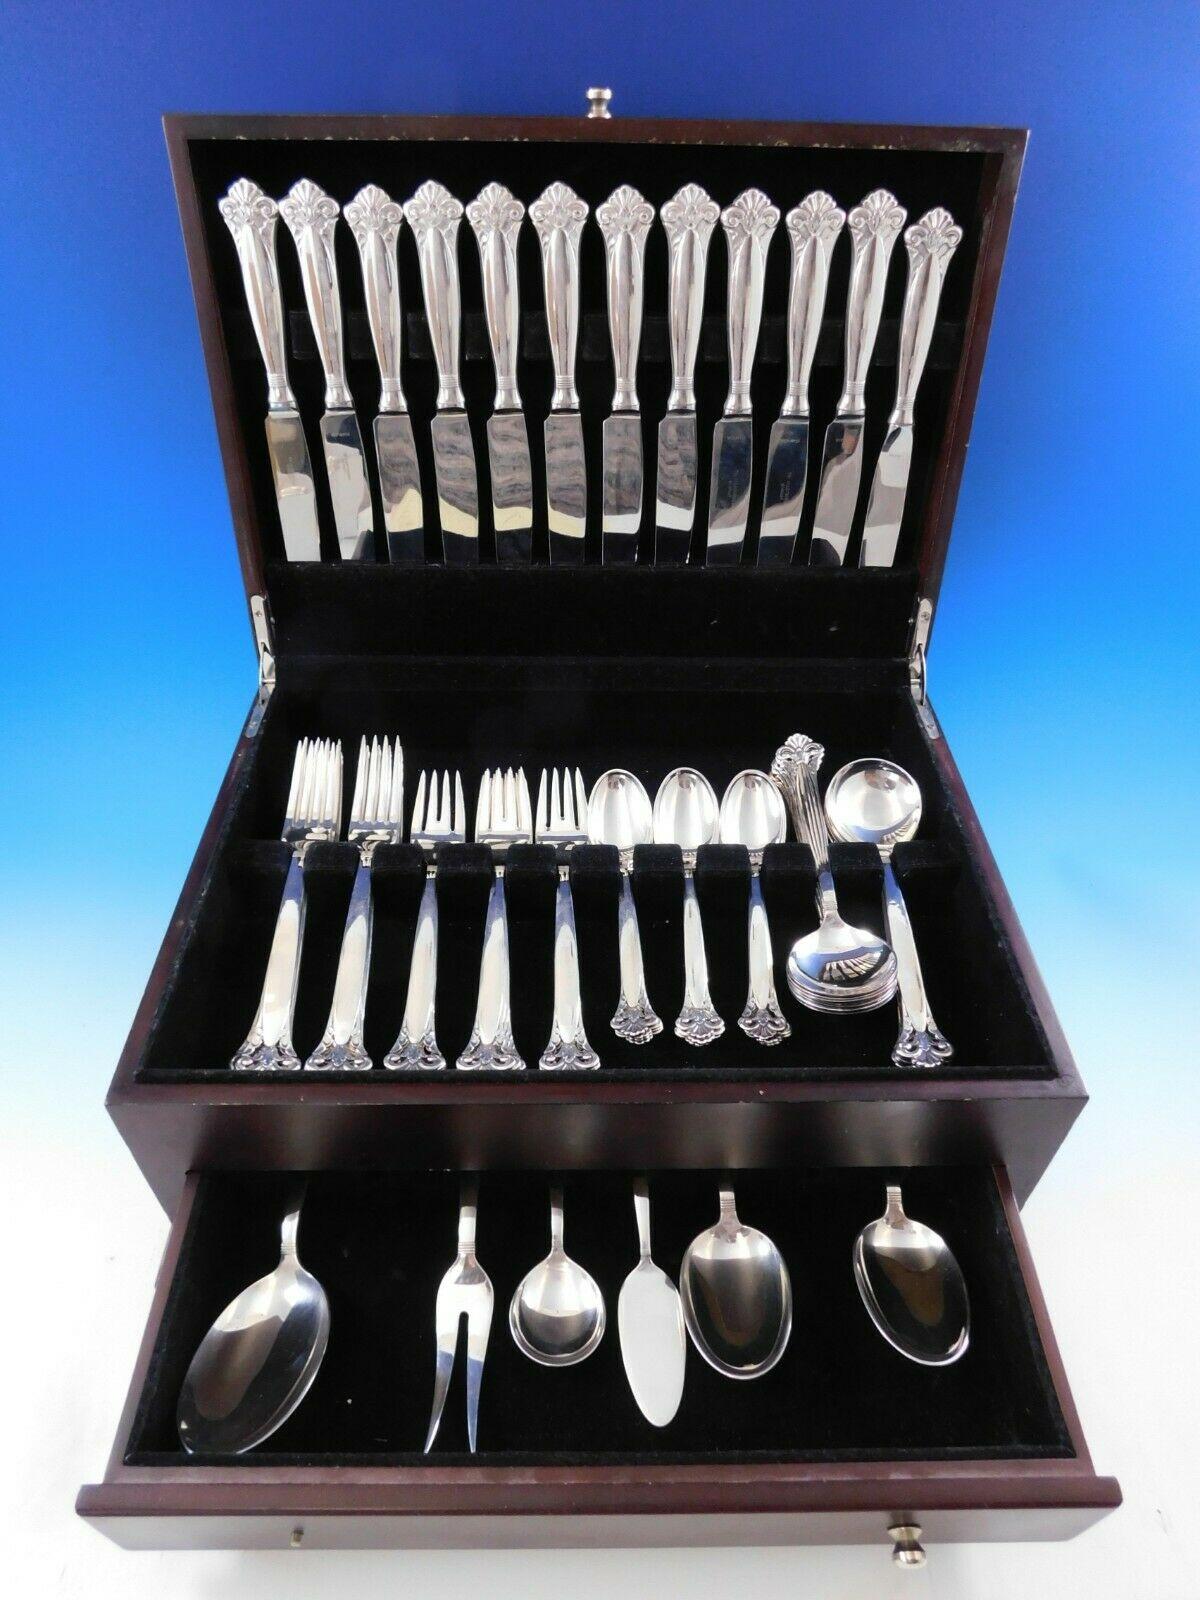 Rare dinner size cloister by Th. Marthinsen Norwegian sterling silver flatware set with unique pierced handle, 66 pieces. This set includes:

12 dinner size knives, 9 1/2